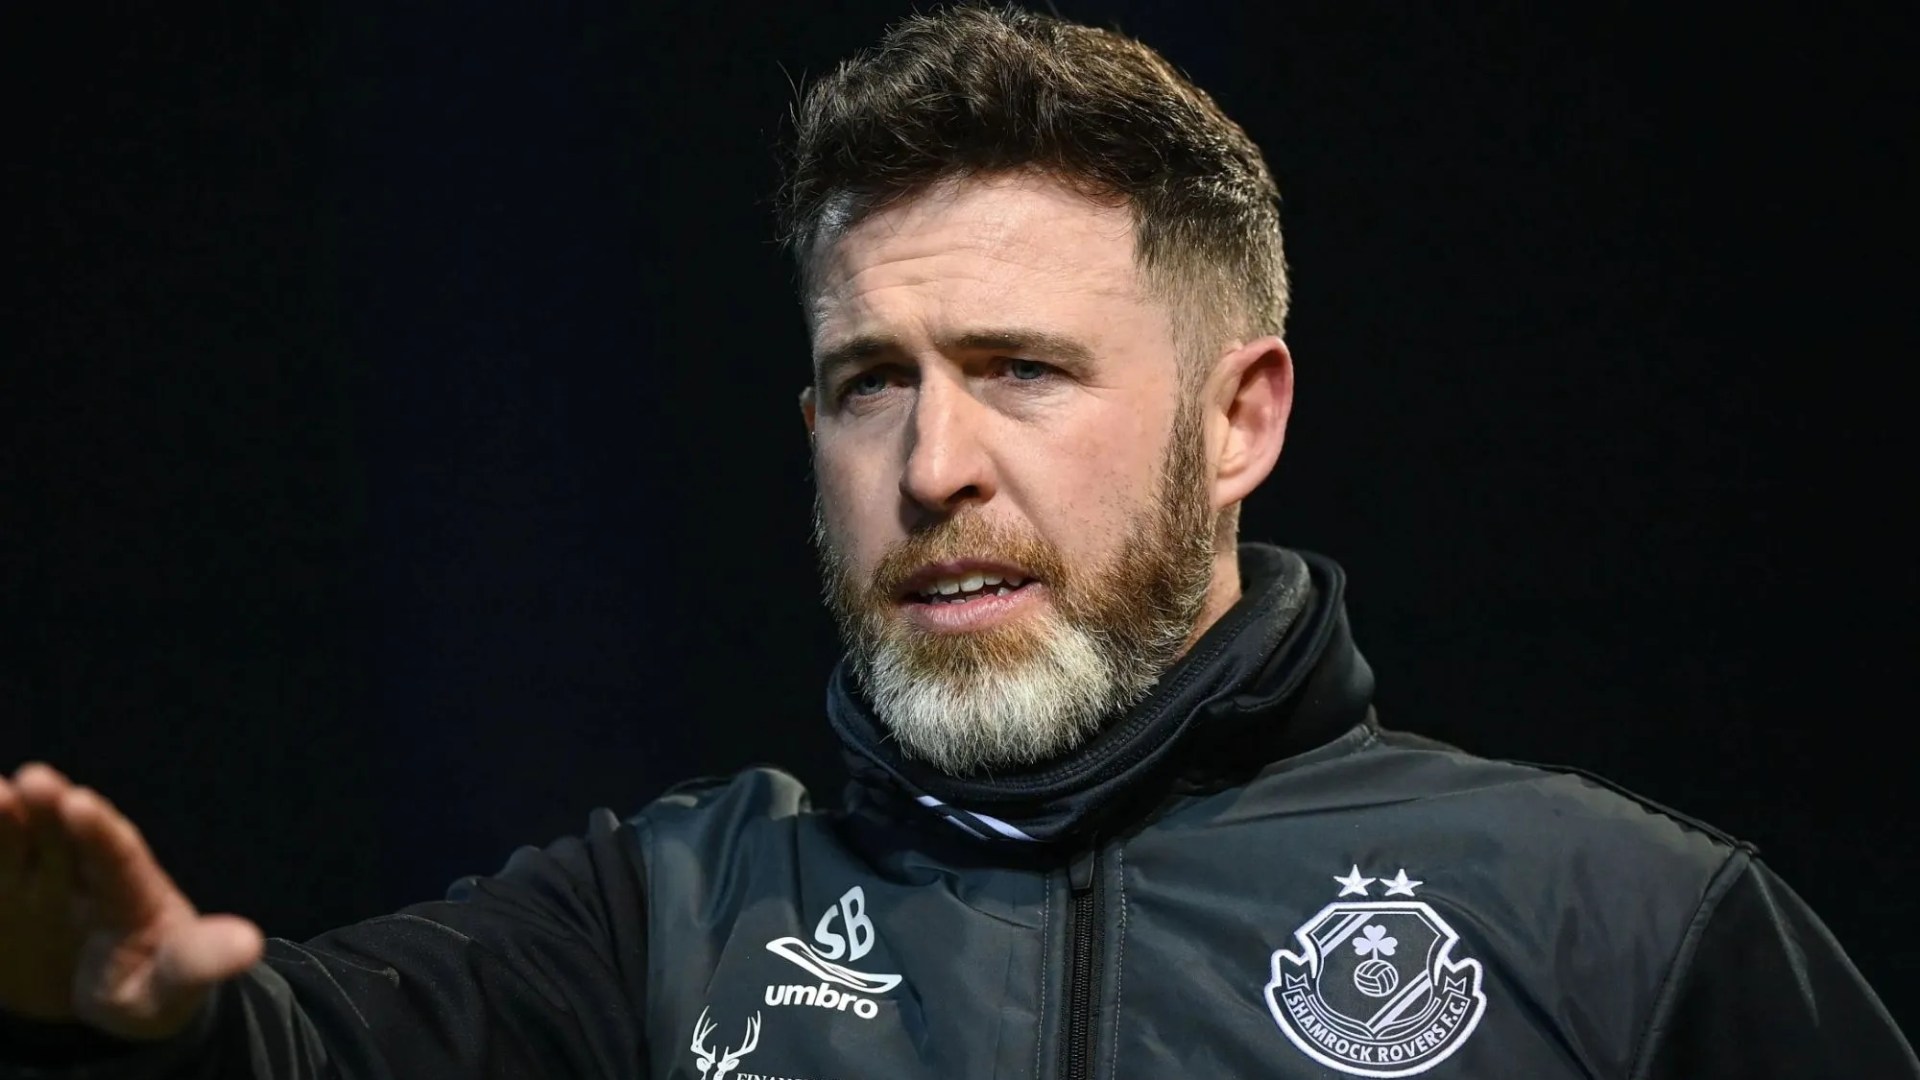 Stephen Bradley urges Derry City to take action after objects thrown at Shamrock Rovers fans from outside Brandywell [Video]